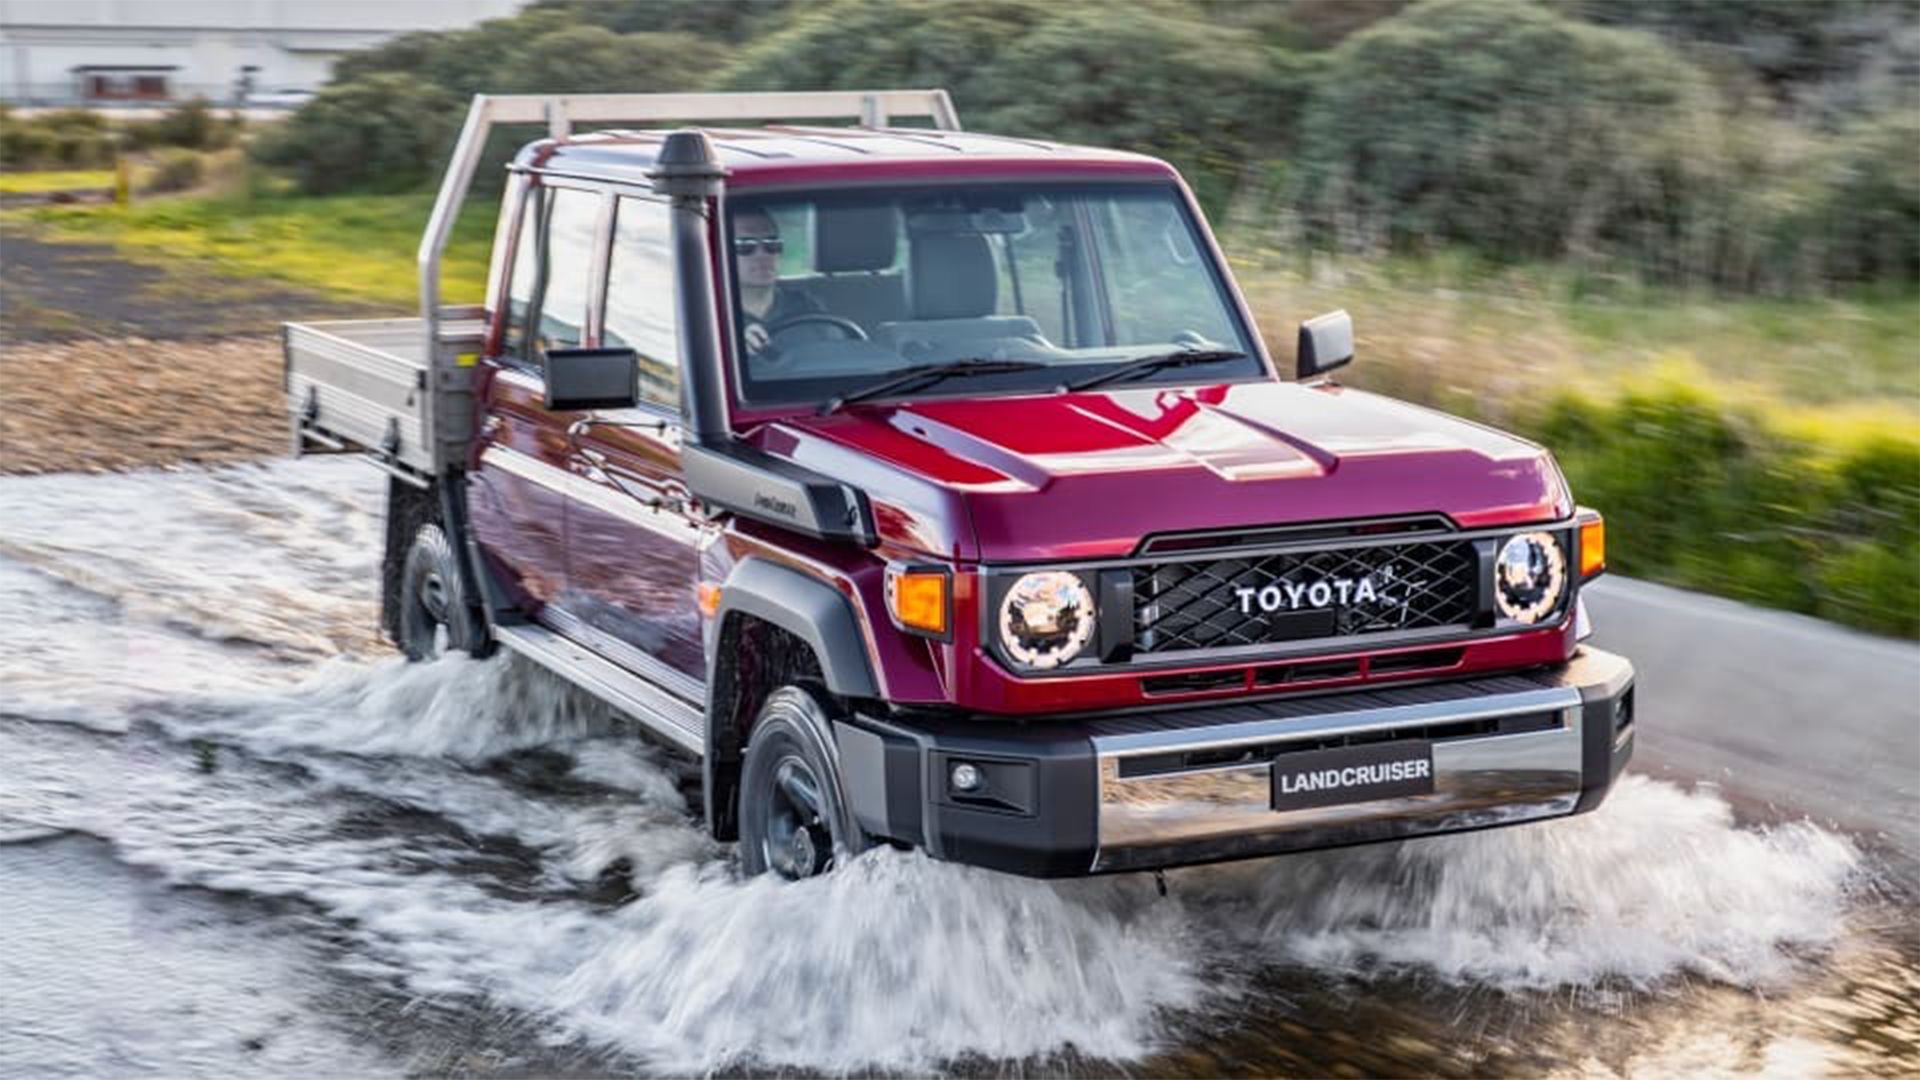 Toyota Land Cruiser 70 Series Lives On And Here's What You Need To Know